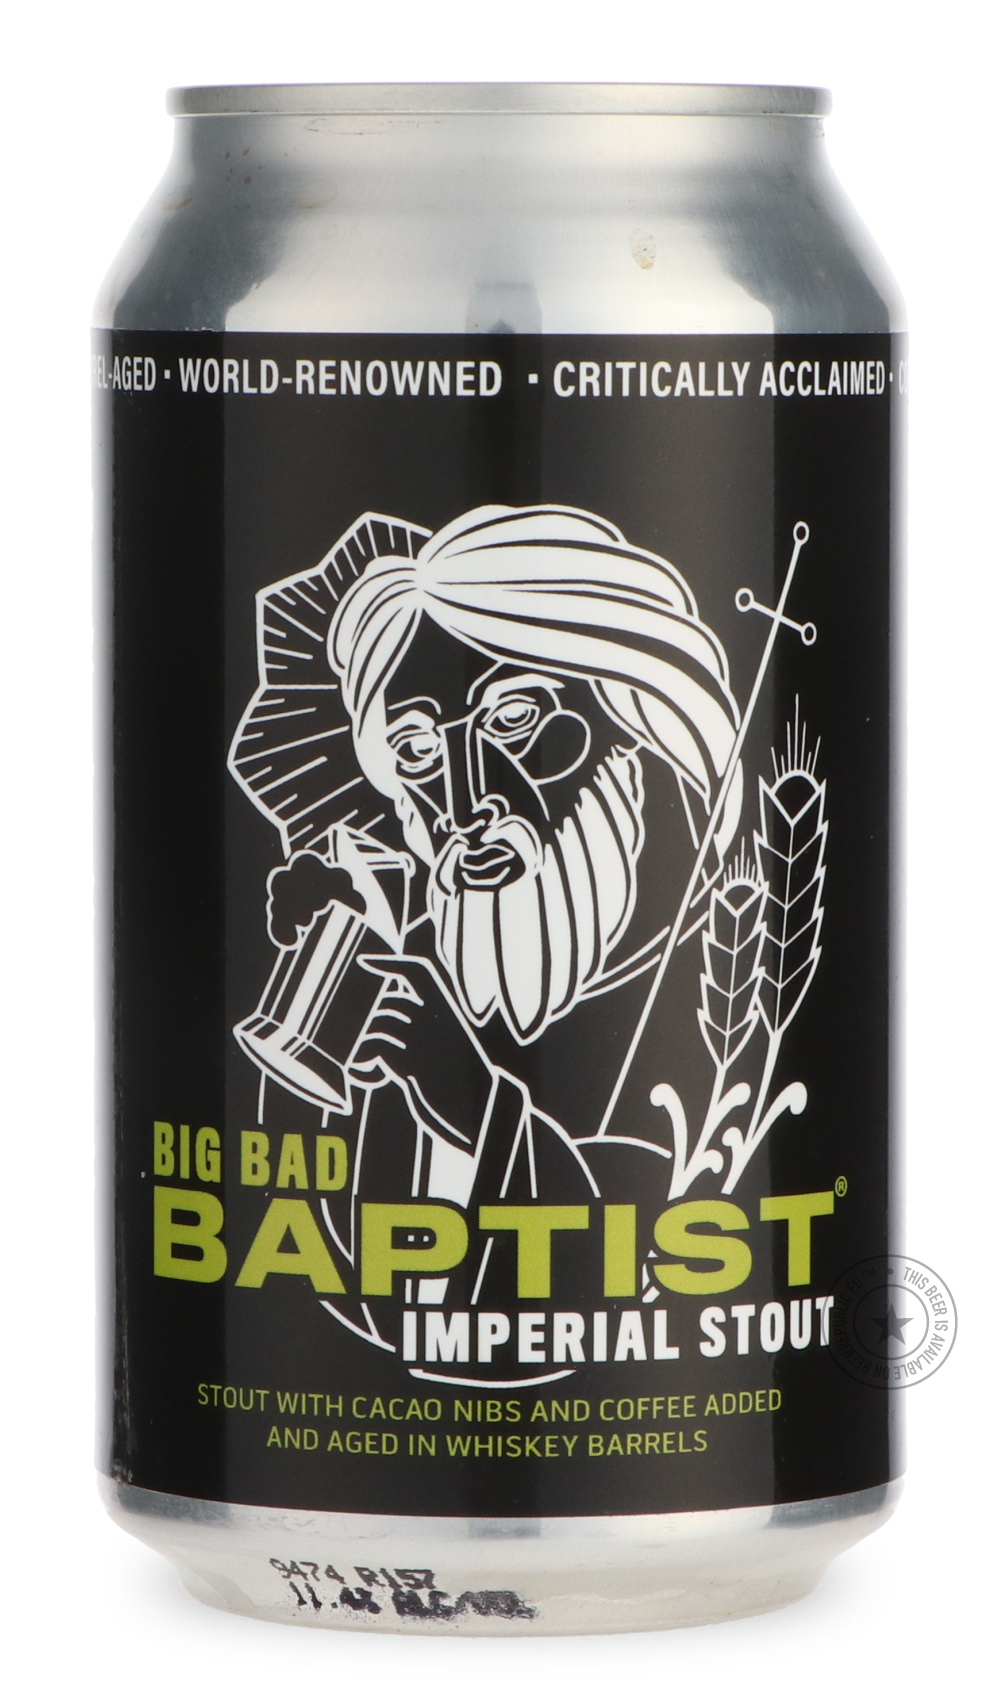 -Epic- Big Bad Baptist-Stout & Porter- Only @ Beer Republic - The best online beer store for American & Canadian craft beer - Buy beer online from the USA and Canada - Bier online kopen - Amerikaans bier kopen - Craft beer store - Craft beer kopen - Amerikanisch bier kaufen - Bier online kaufen - Acheter biere online - IPA - Stout - Porter - New England IPA - Hazy IPA - Imperial Stout - Barrel Aged - Barrel Aged Imperial Stout - Brown - Dark beer - Blond - Blonde - Pilsner - Lager - Wheat - Weizen - Amber -